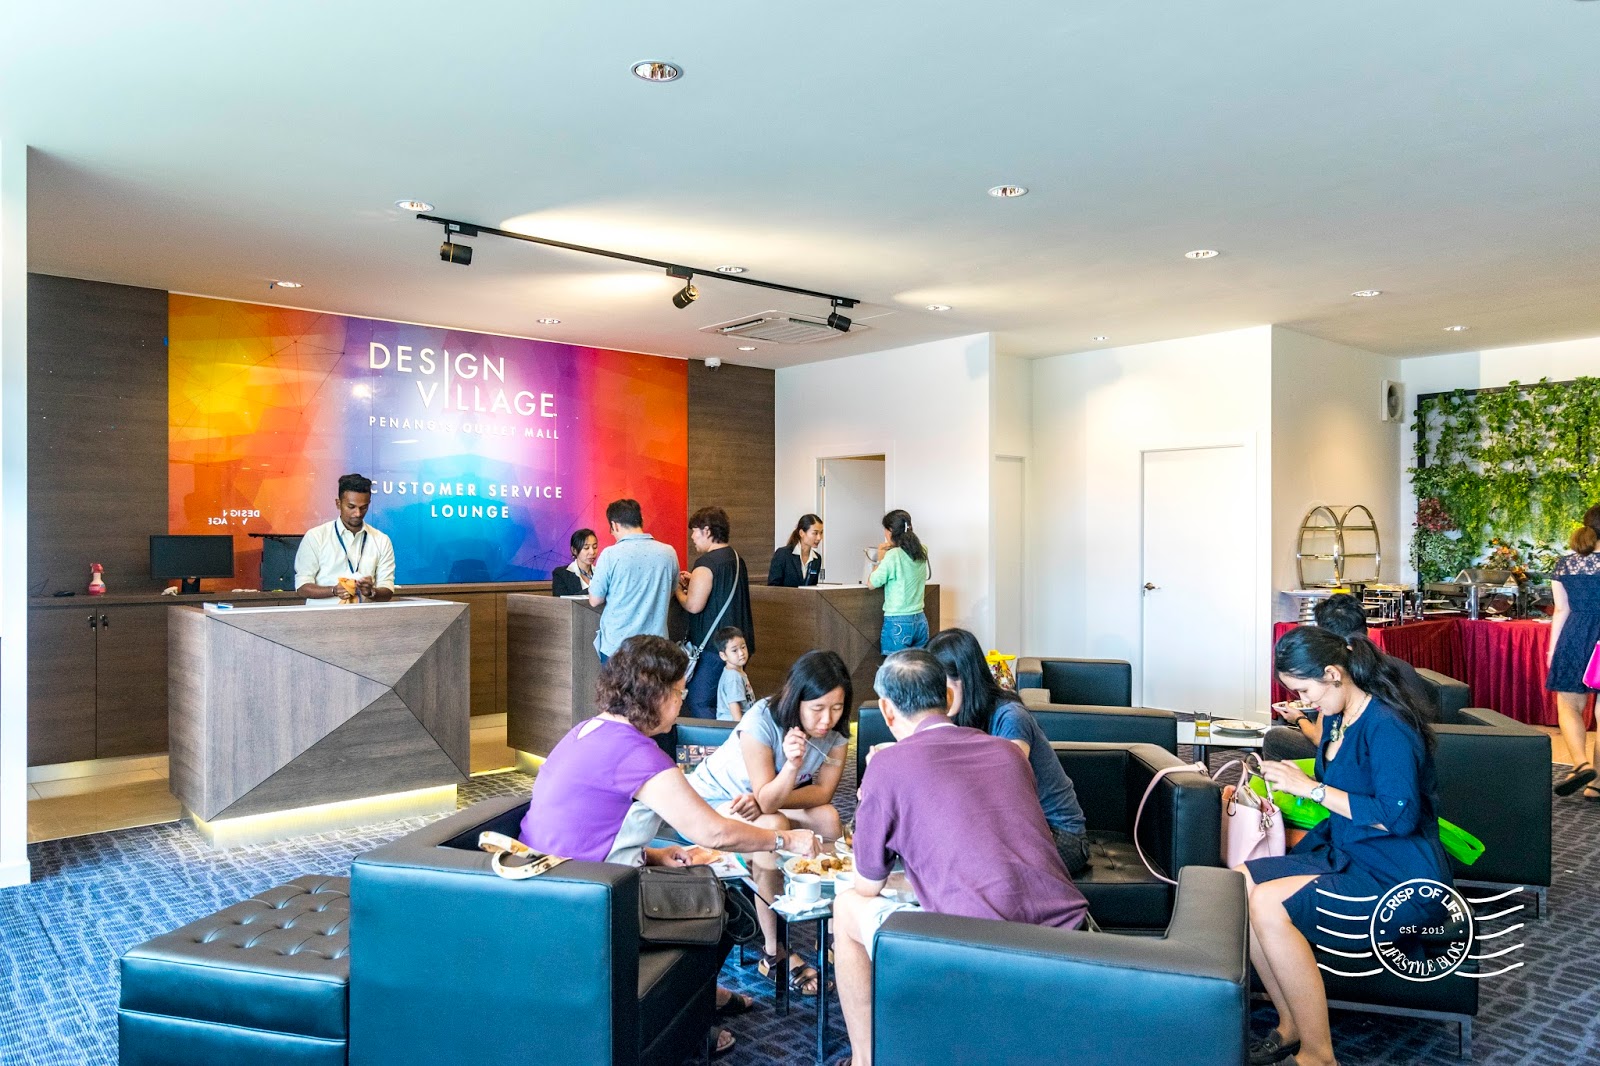 Design's Village Penang Outlet Mall's Customer Service Lounge launched! 